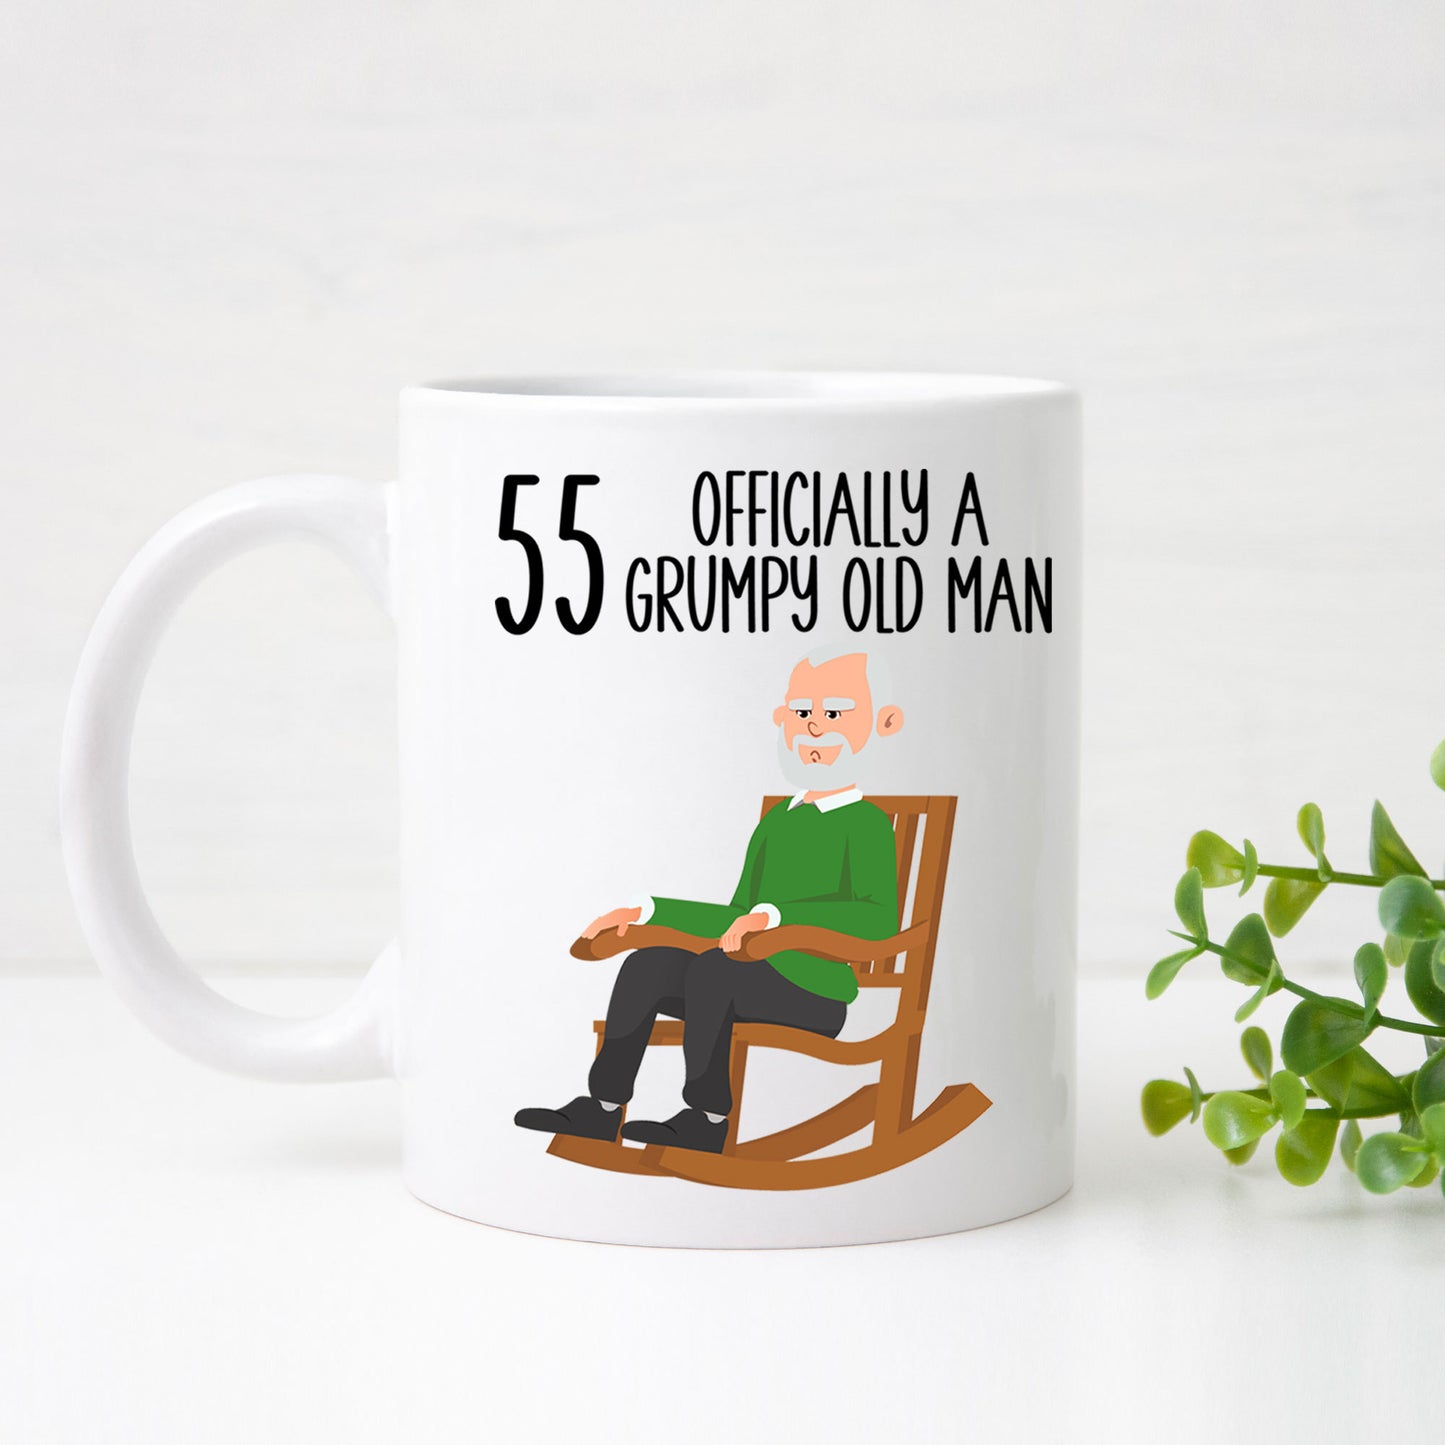 55 Officially A Grumpy Old Man Mug and/or Coaster Gift  - Always Looking Good -   